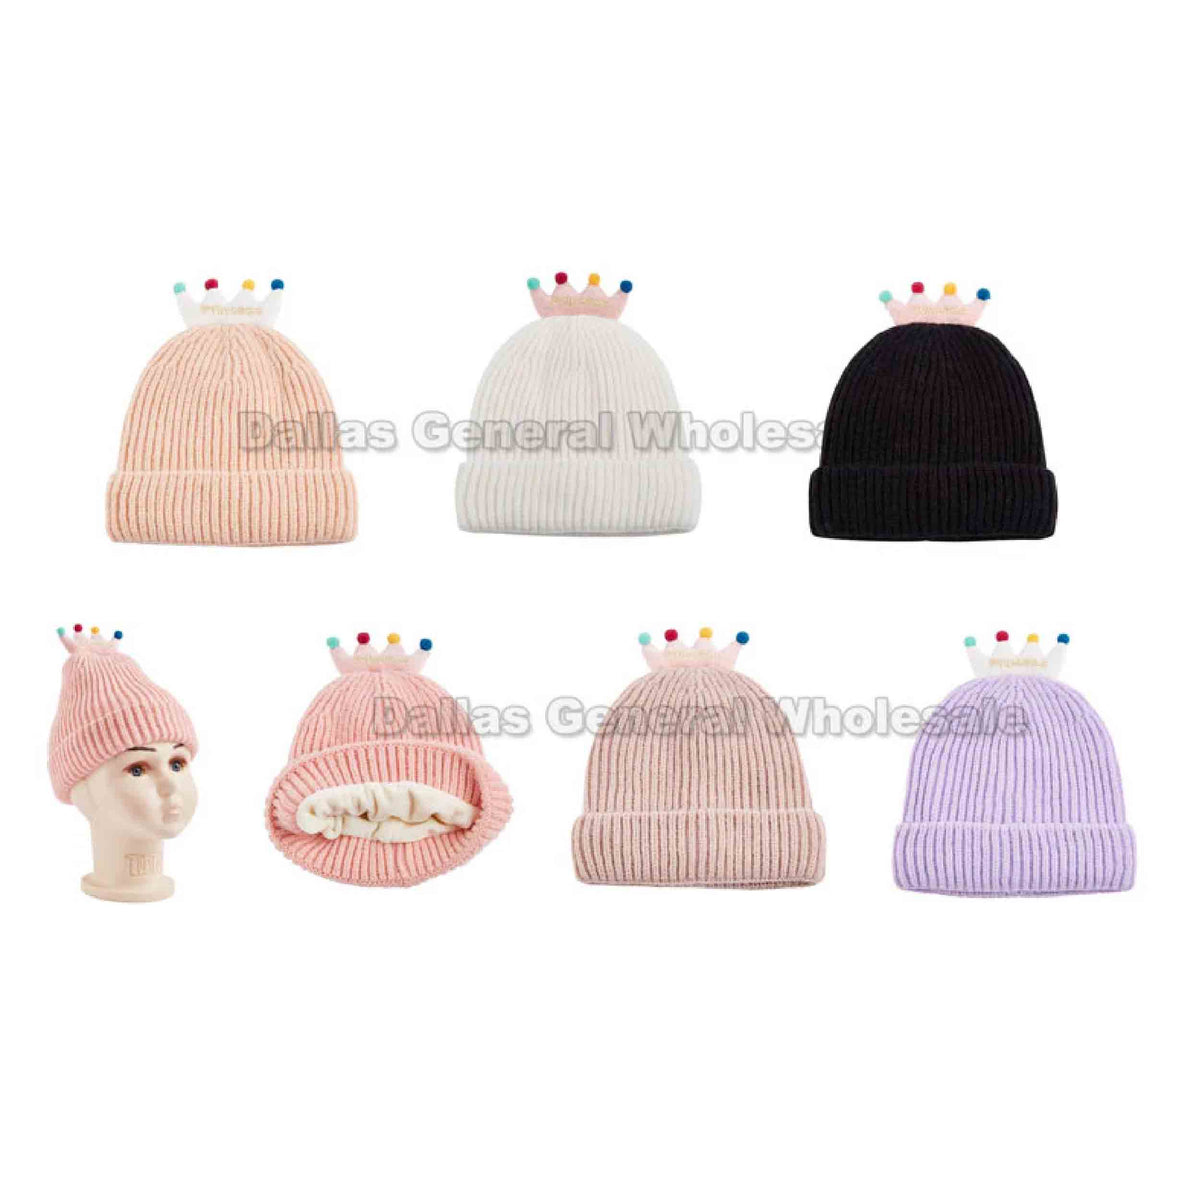 Adorable Crown Beanie Hats  For Kids Wholesale - Assorted